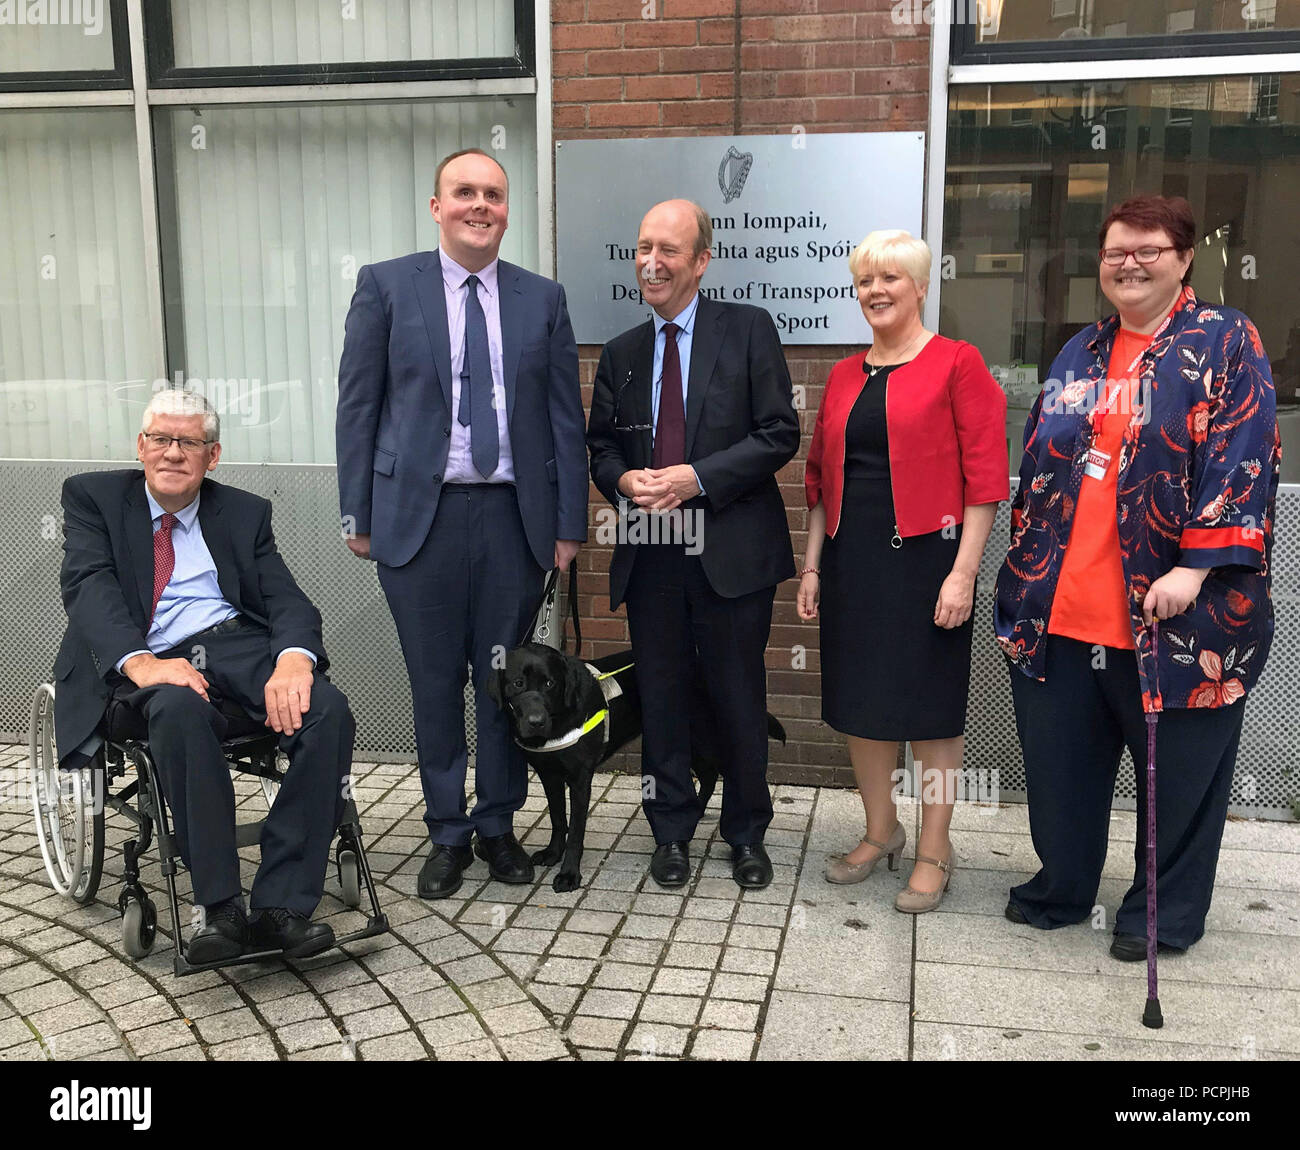 Ireland's transport Minister Shane Ross (centre) with (left to right) Liam ORourke, Kevin Kelly with guide dog Miles, Elaine Howley and Suzy Byrne at the announcement of the new appointments to public transport boards in Dublin. Stock Photo